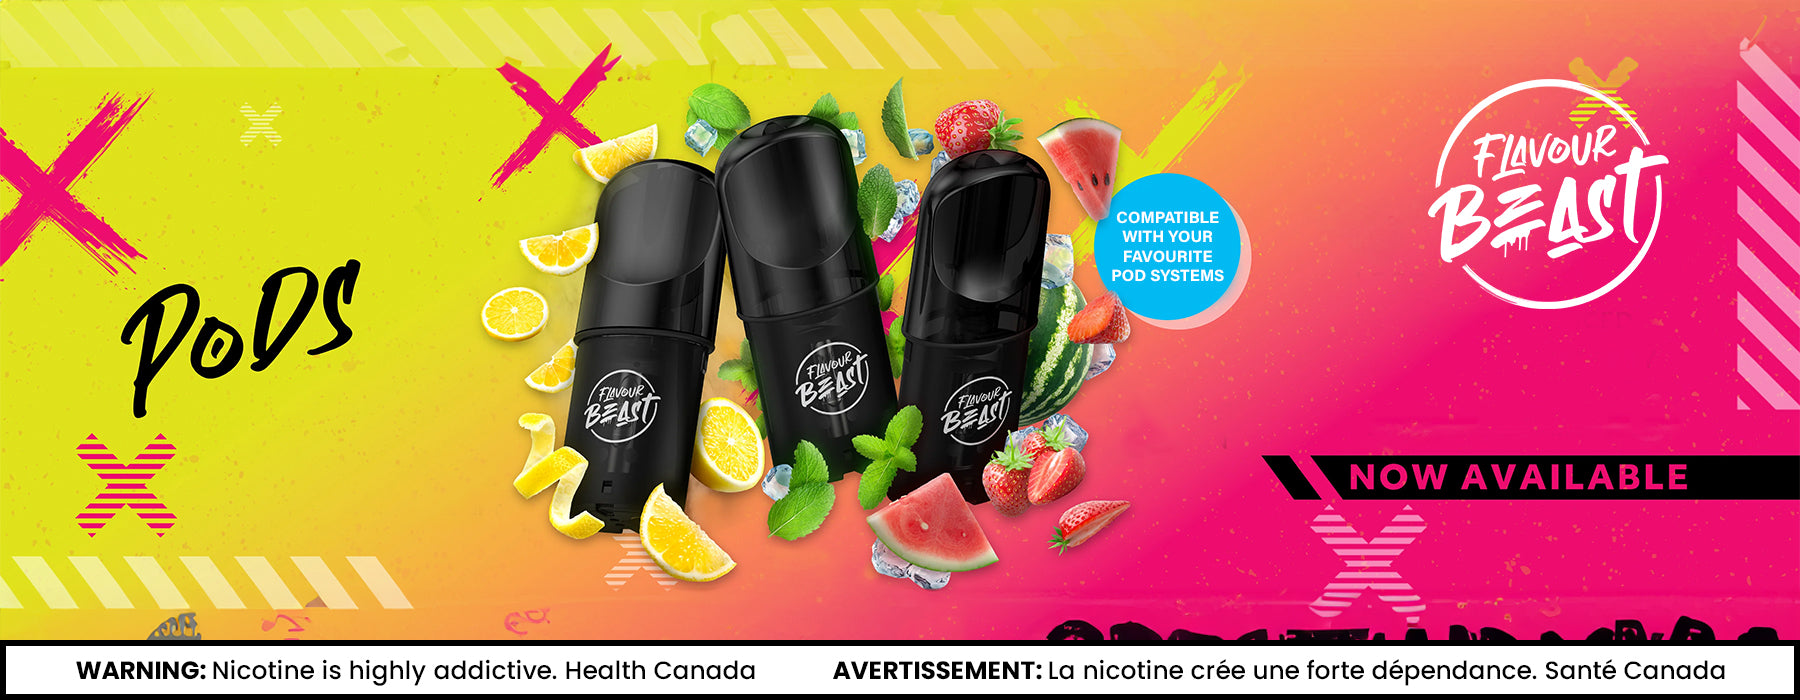 onewholesale.ca flavour beast pods main banner